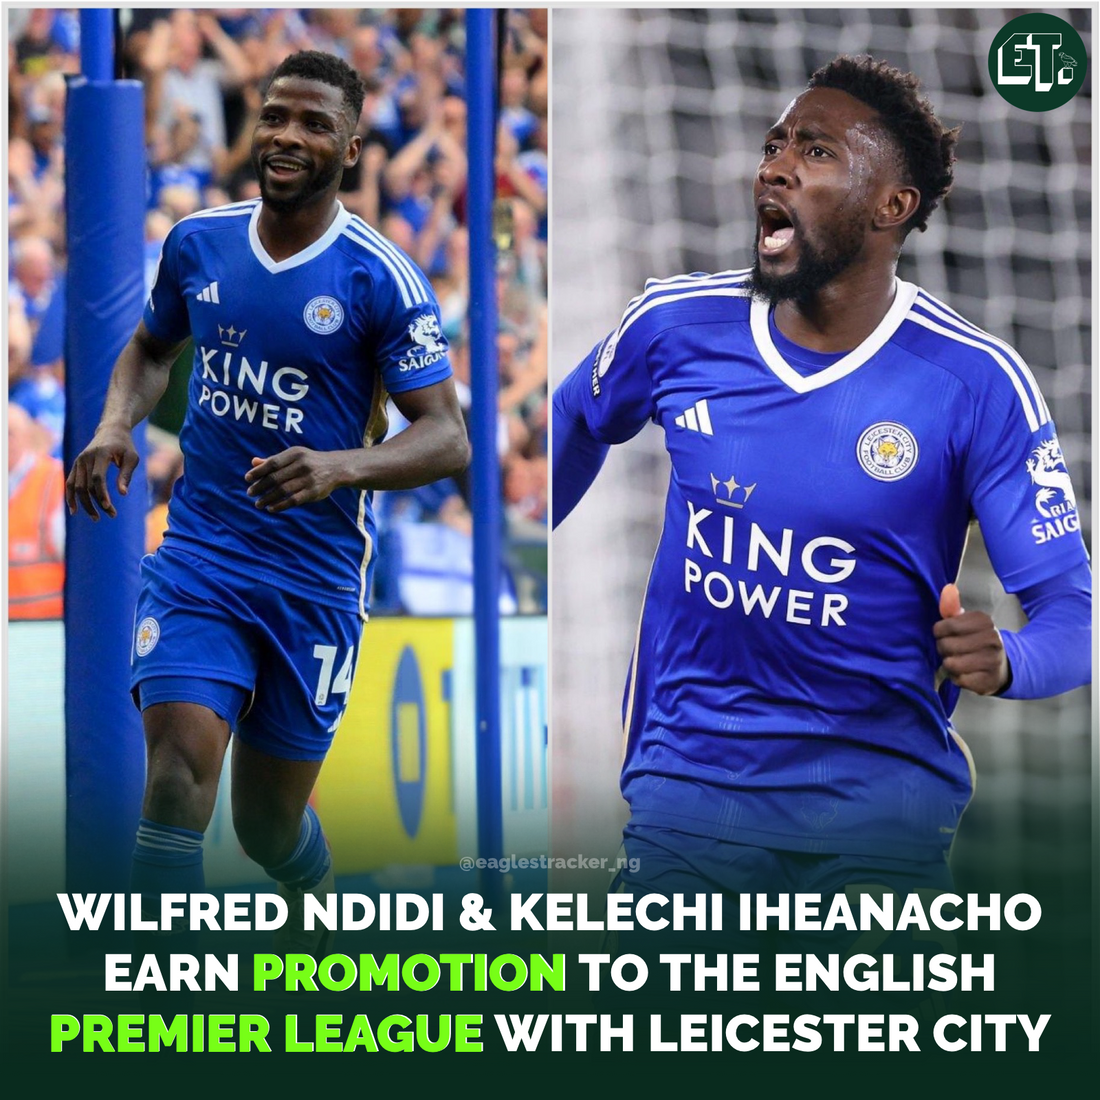 Iheanacho and Ndidi are back in the Premier League with Leicester City